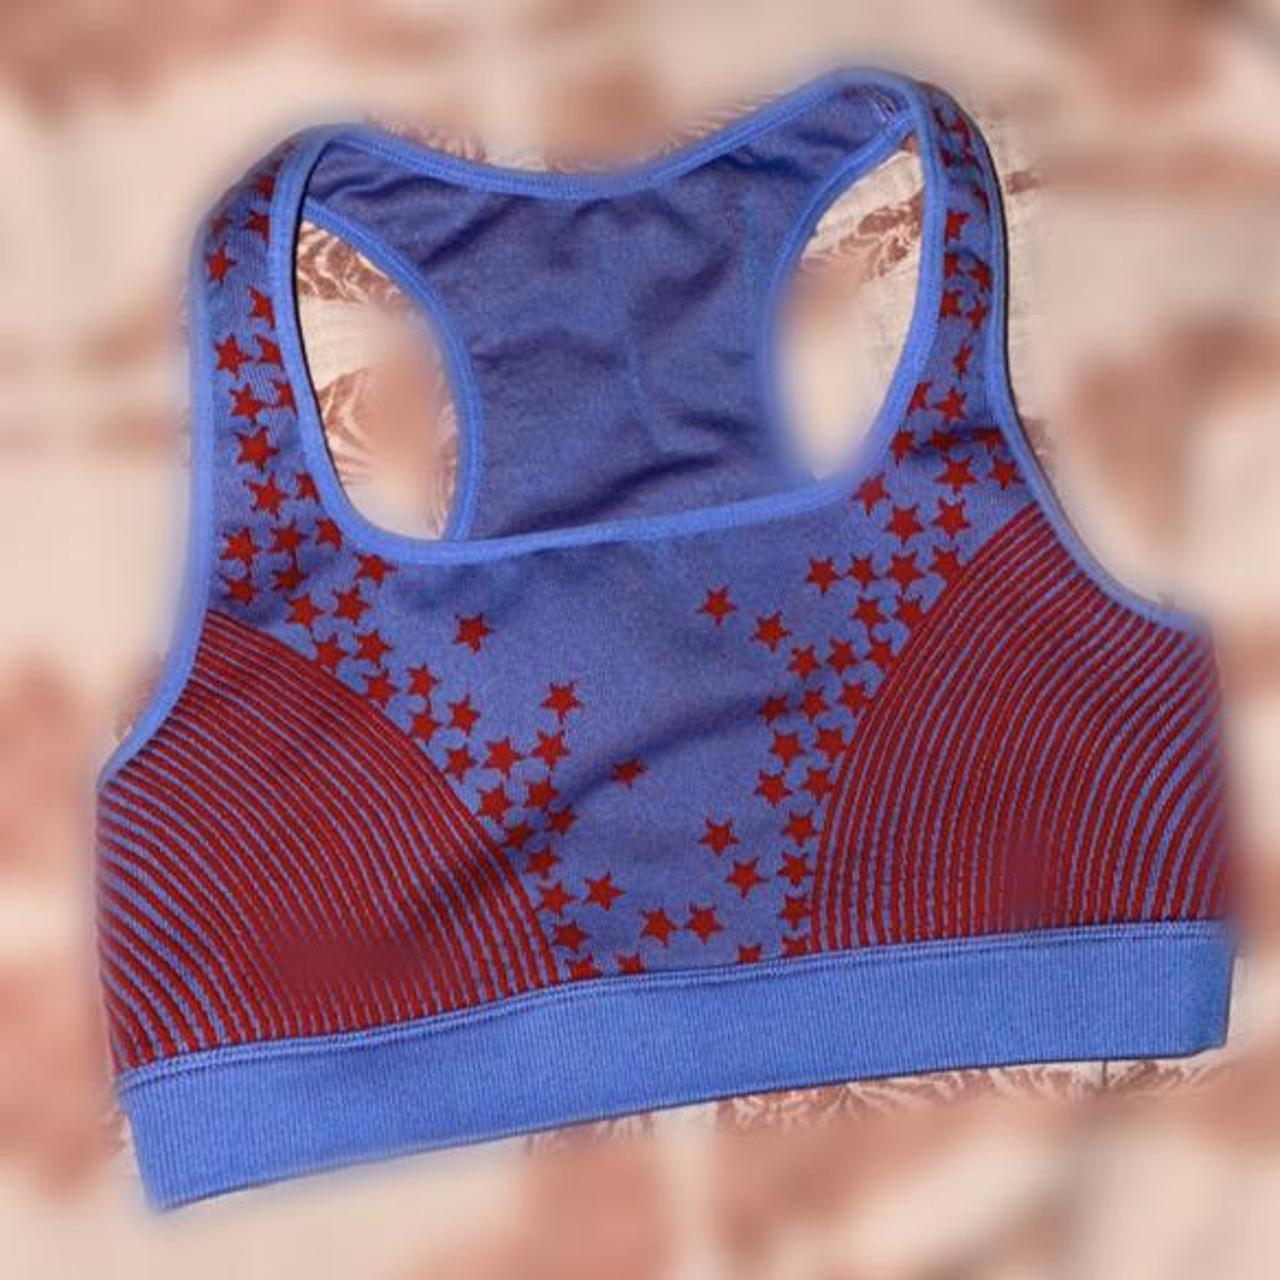 Product Image 1 - ✨Fabletics star sports bra✨

*seamless 

💕Shipping:$5.45💕